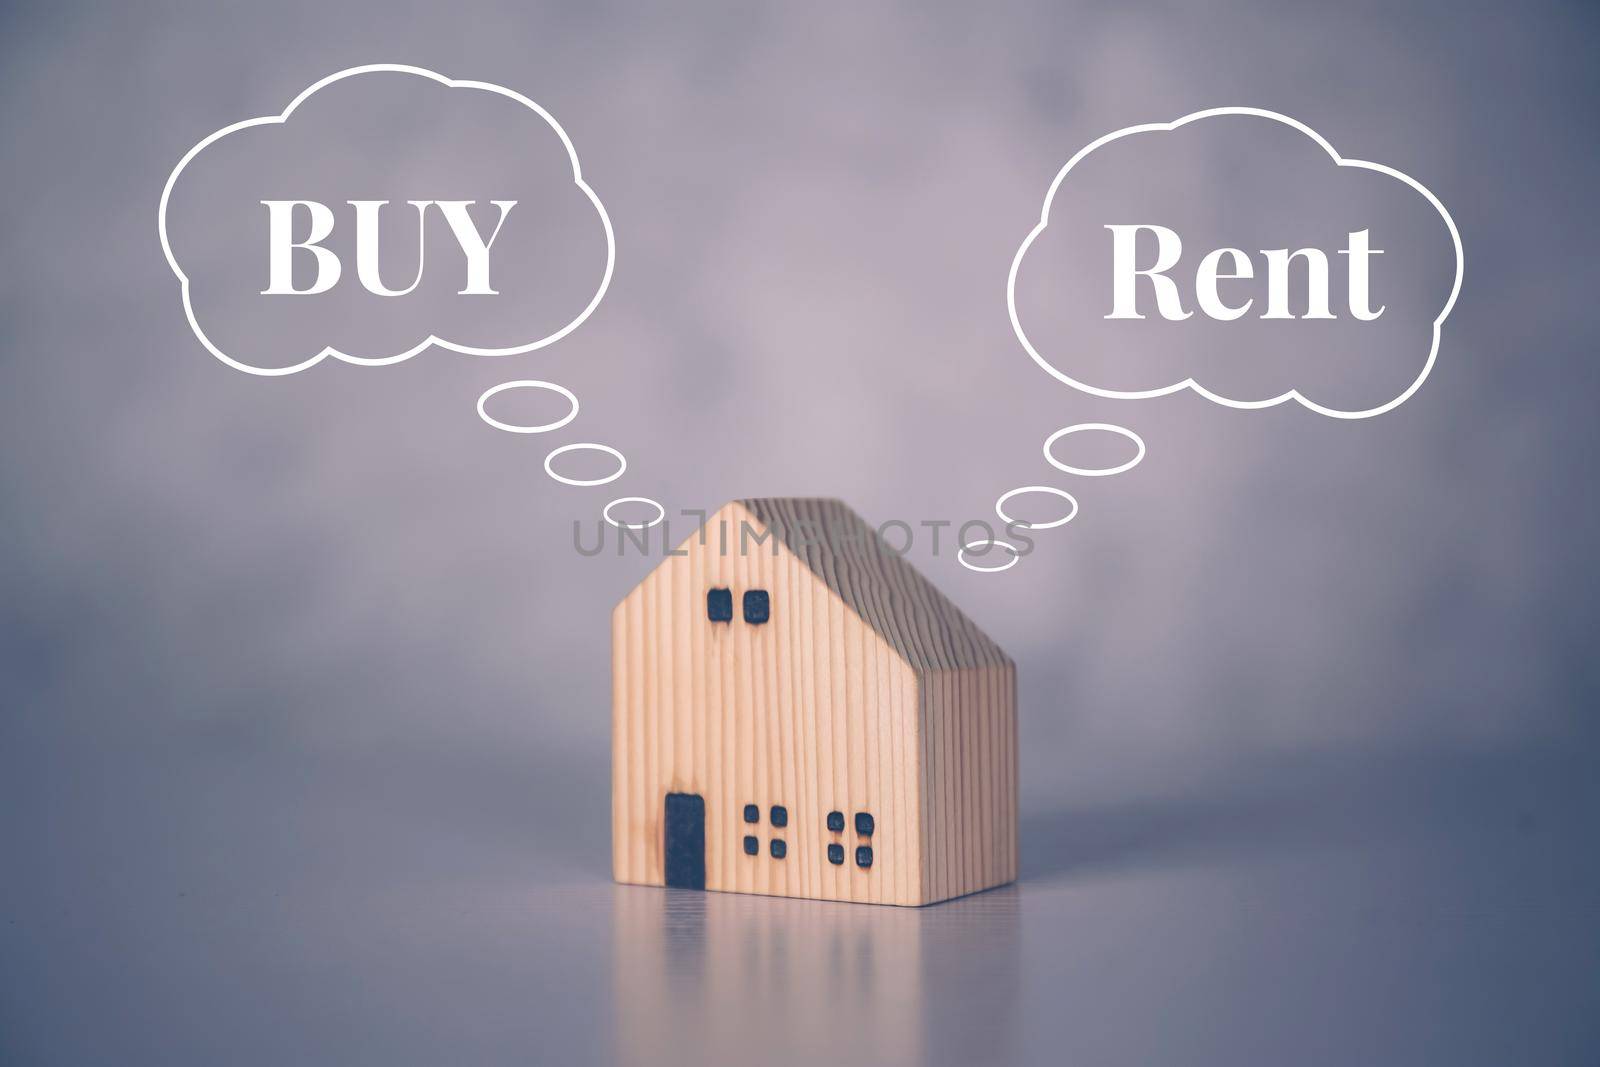 Rent or buy home with real estate for benefits, decision about planning and strategy of house and tax, property with success and saving financial, comparison and advantage, business concept.